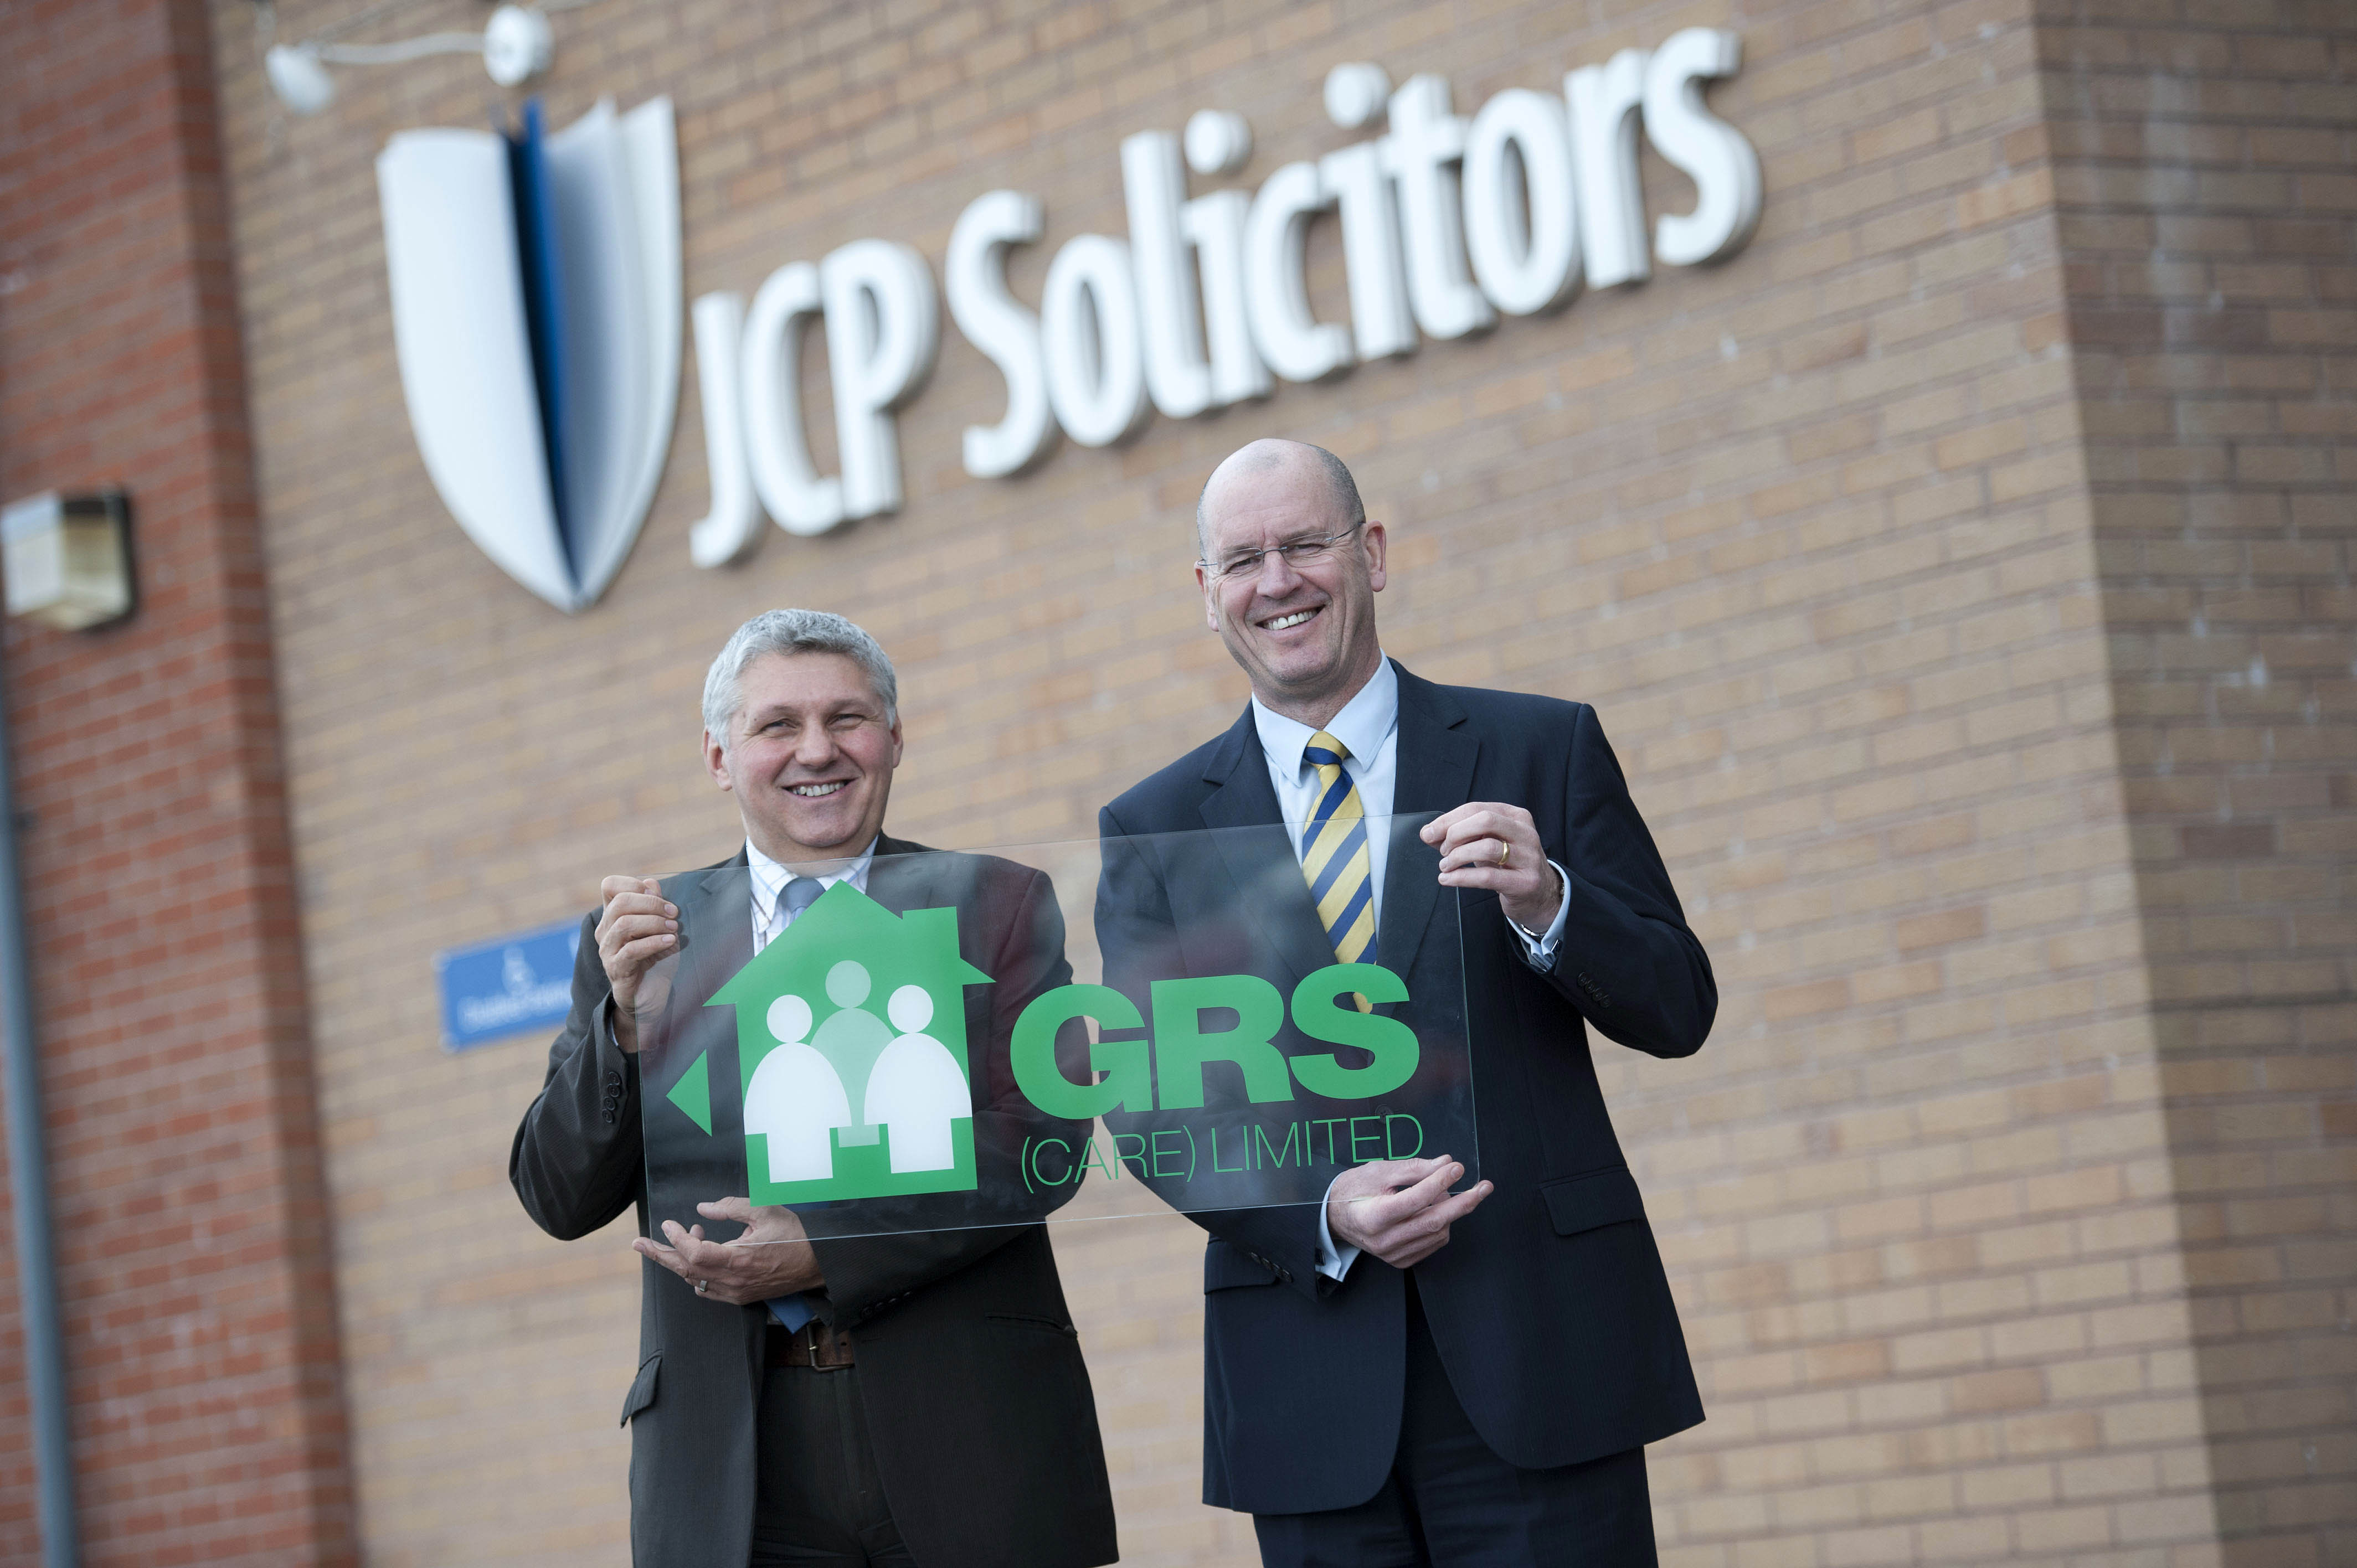 Chris Davies, Director at JCP Solicitors and Dave Howells, Director at GRS Care Ltd.